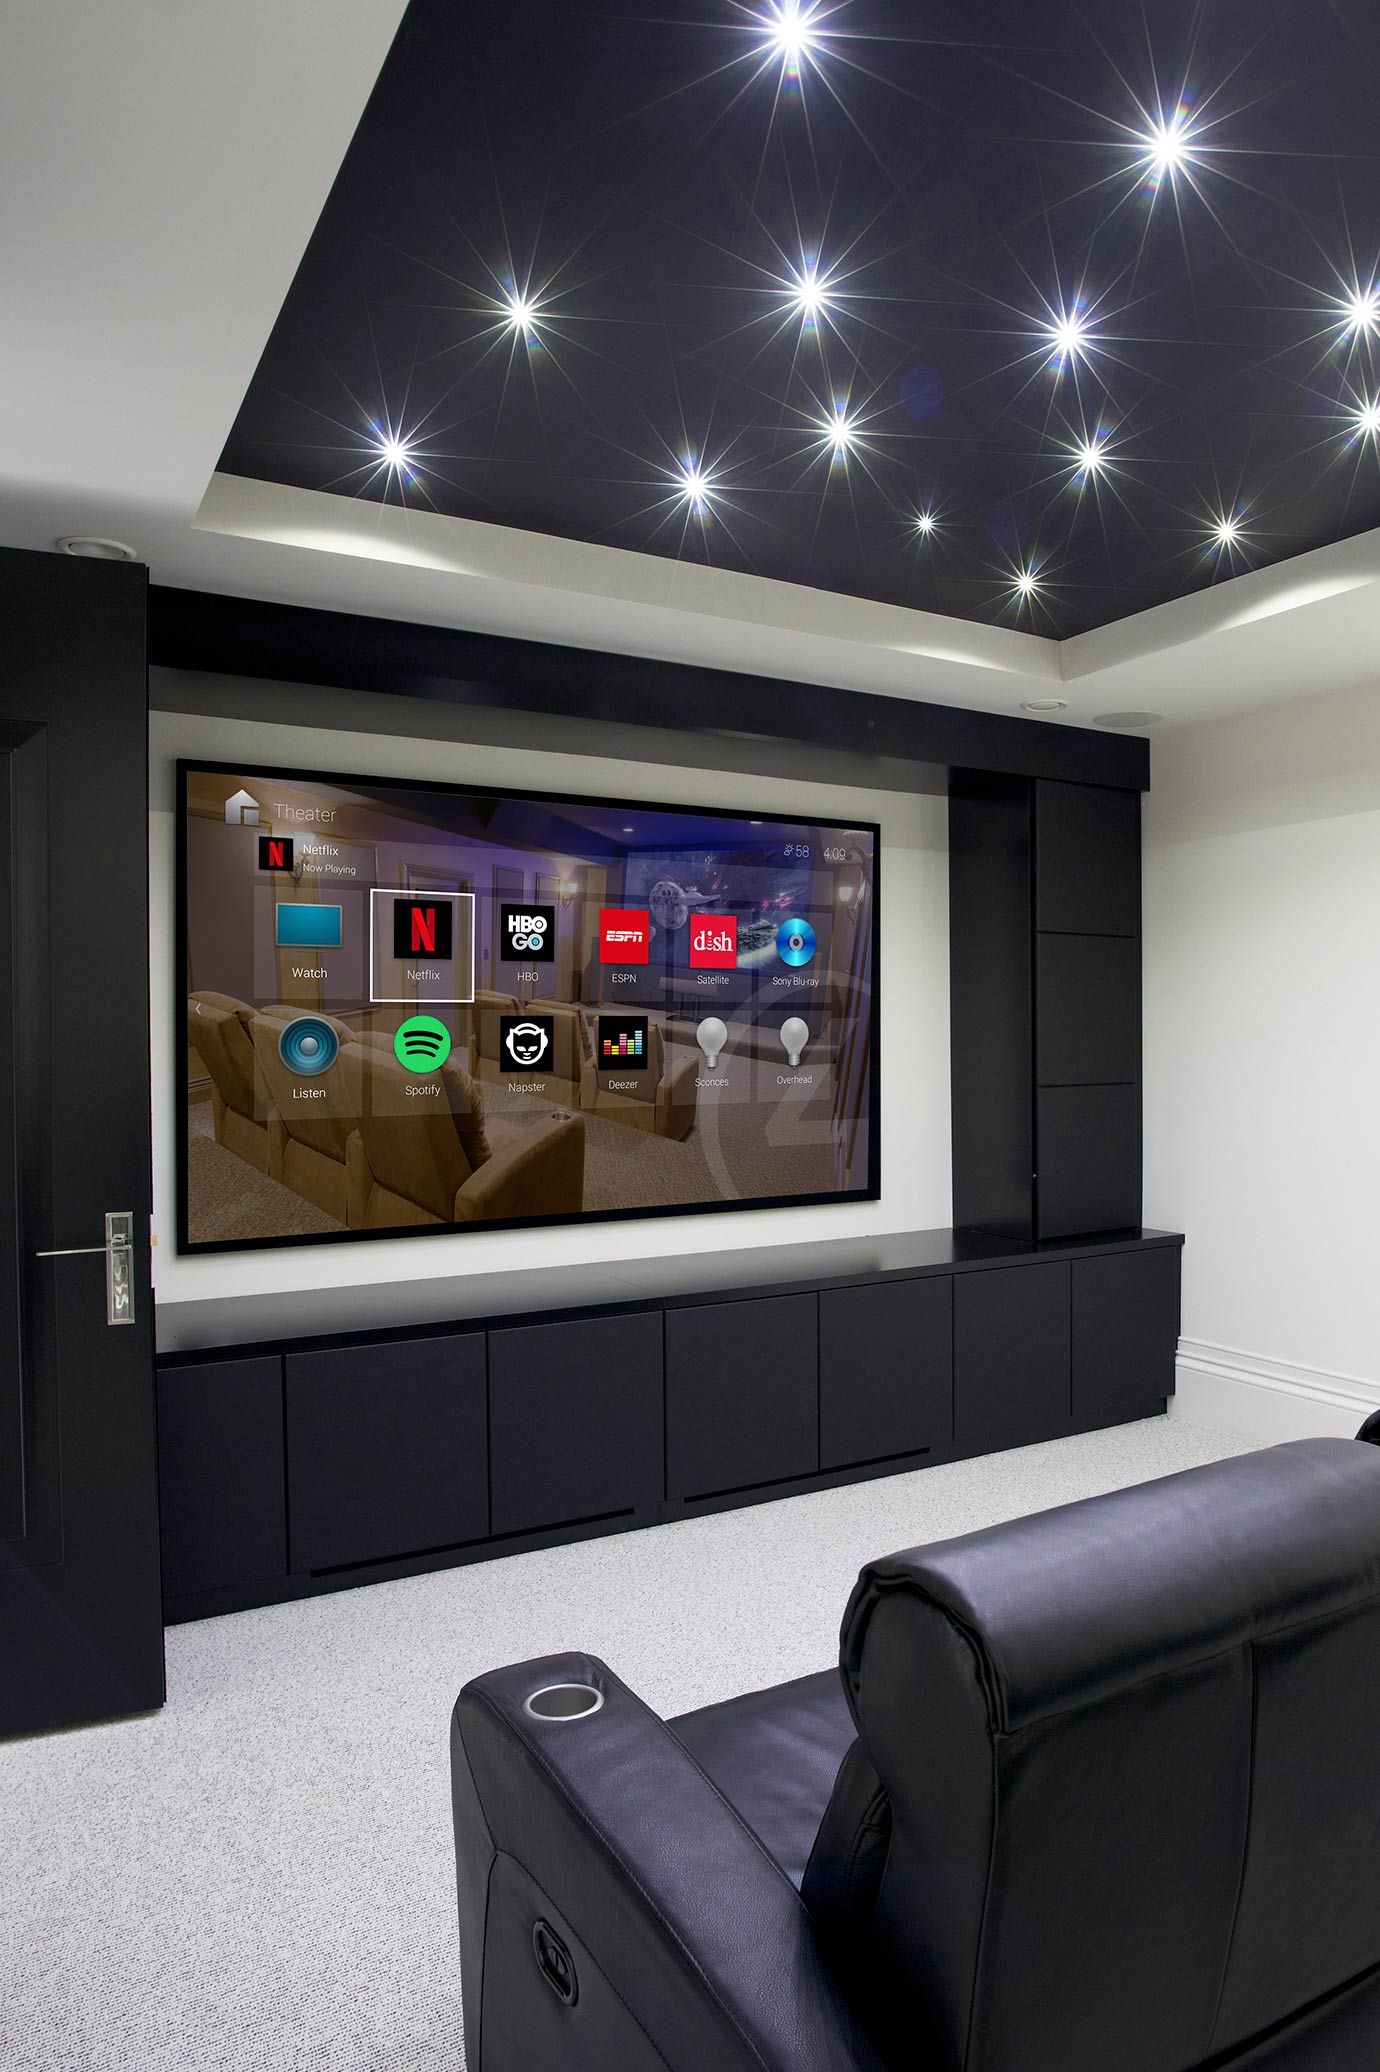 Star Ceilings in a home theater with Control4 interface